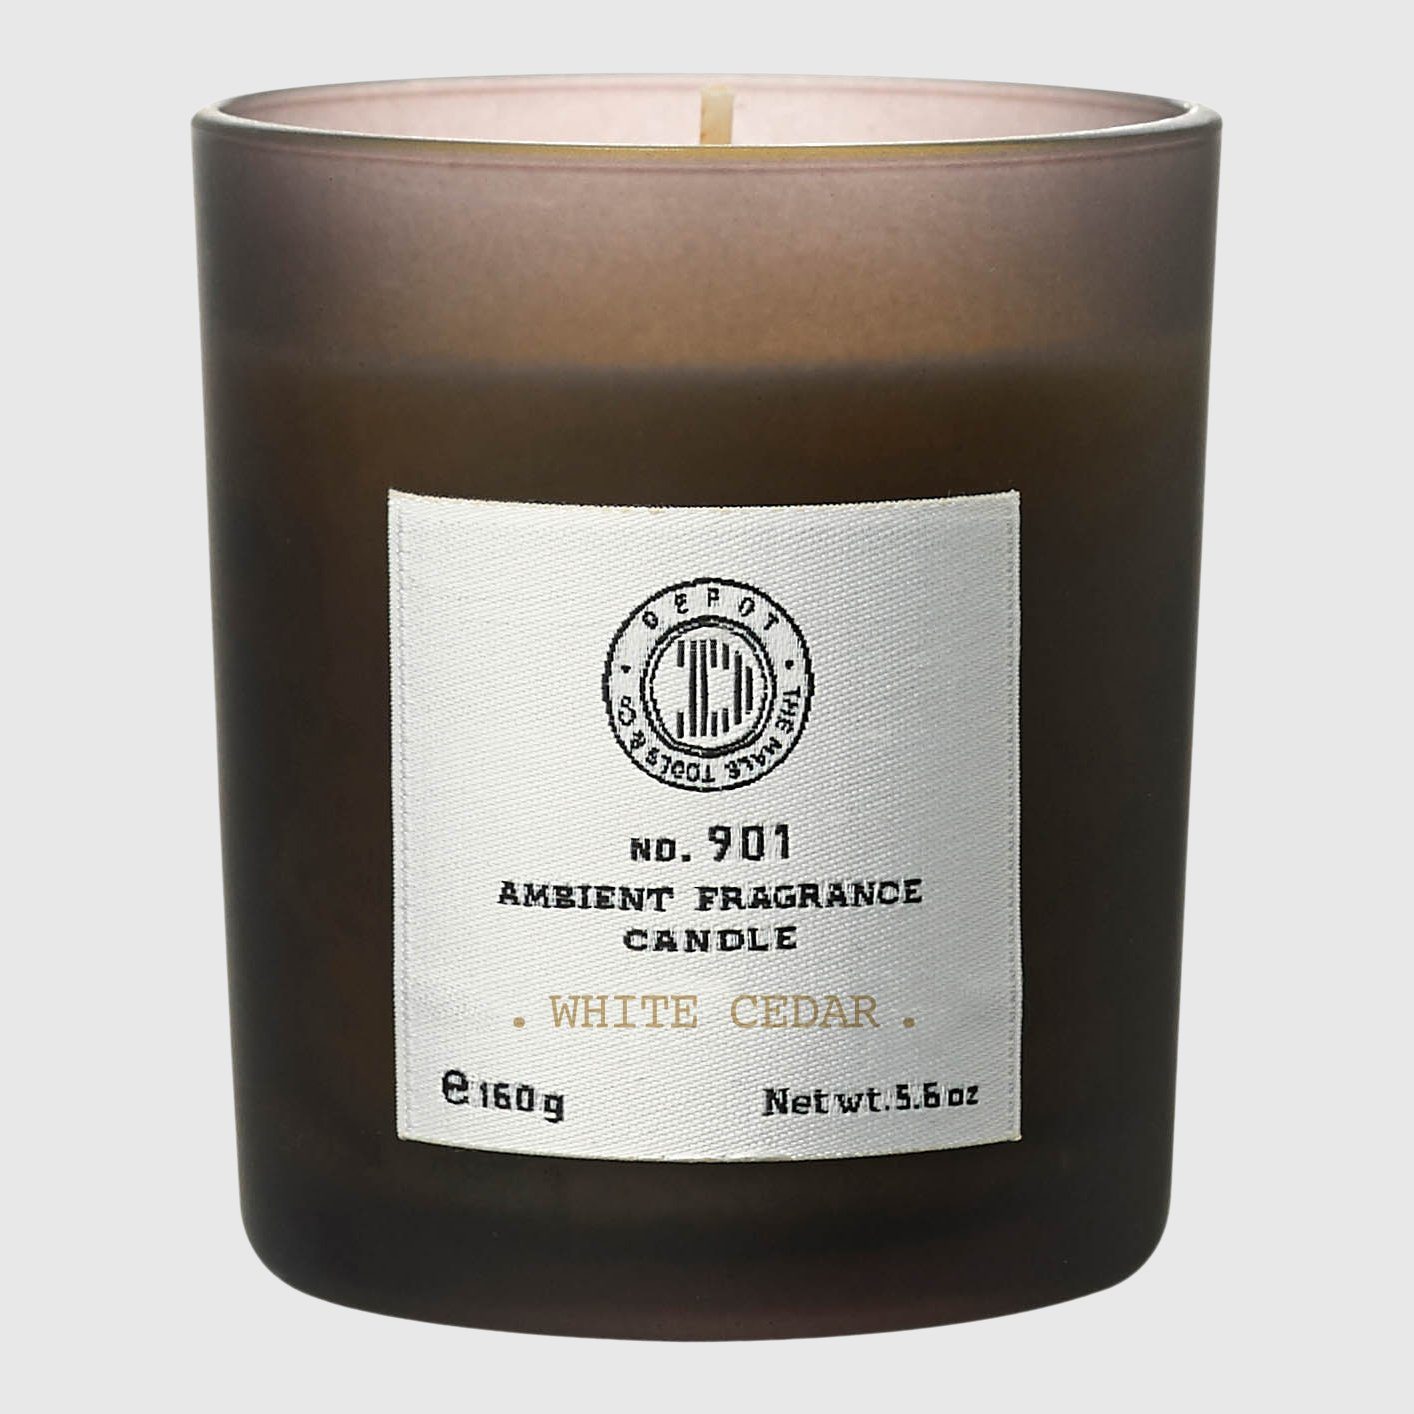 Depot No. 901 Ambient Fragrance Candle Candle Depot White Cedar 